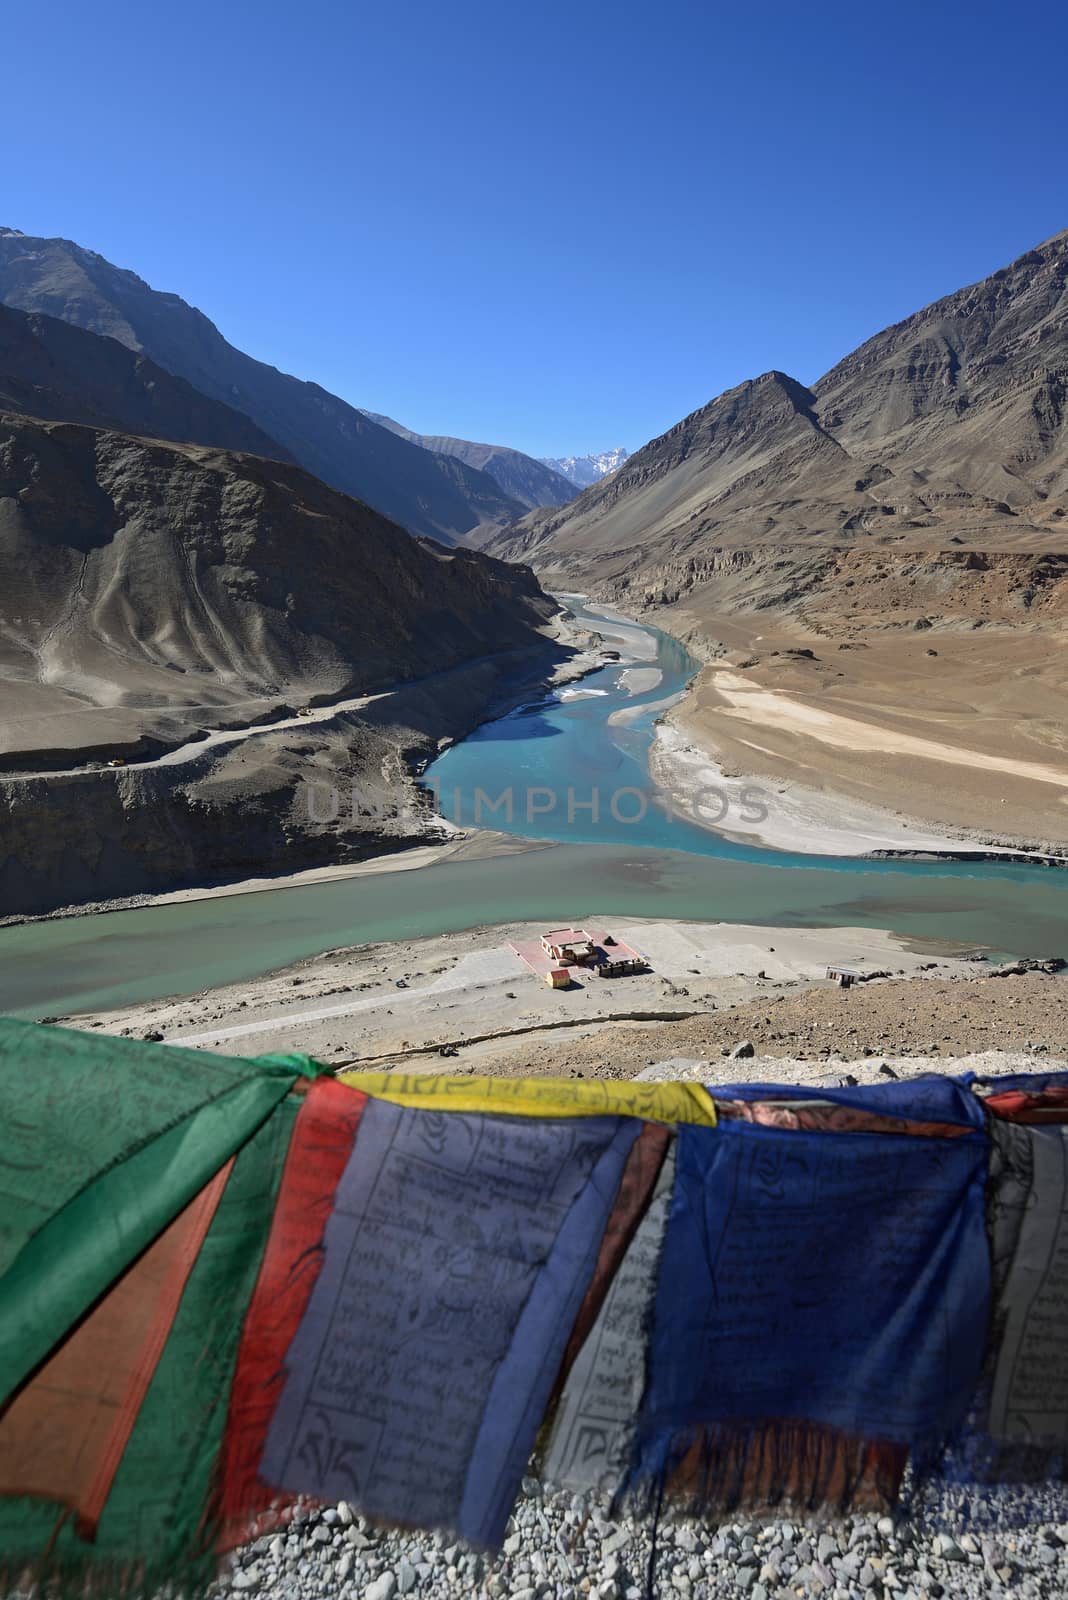 Confluence of Zanskar and Indus rivers and prayer flag- Leh, Lad by think4photop